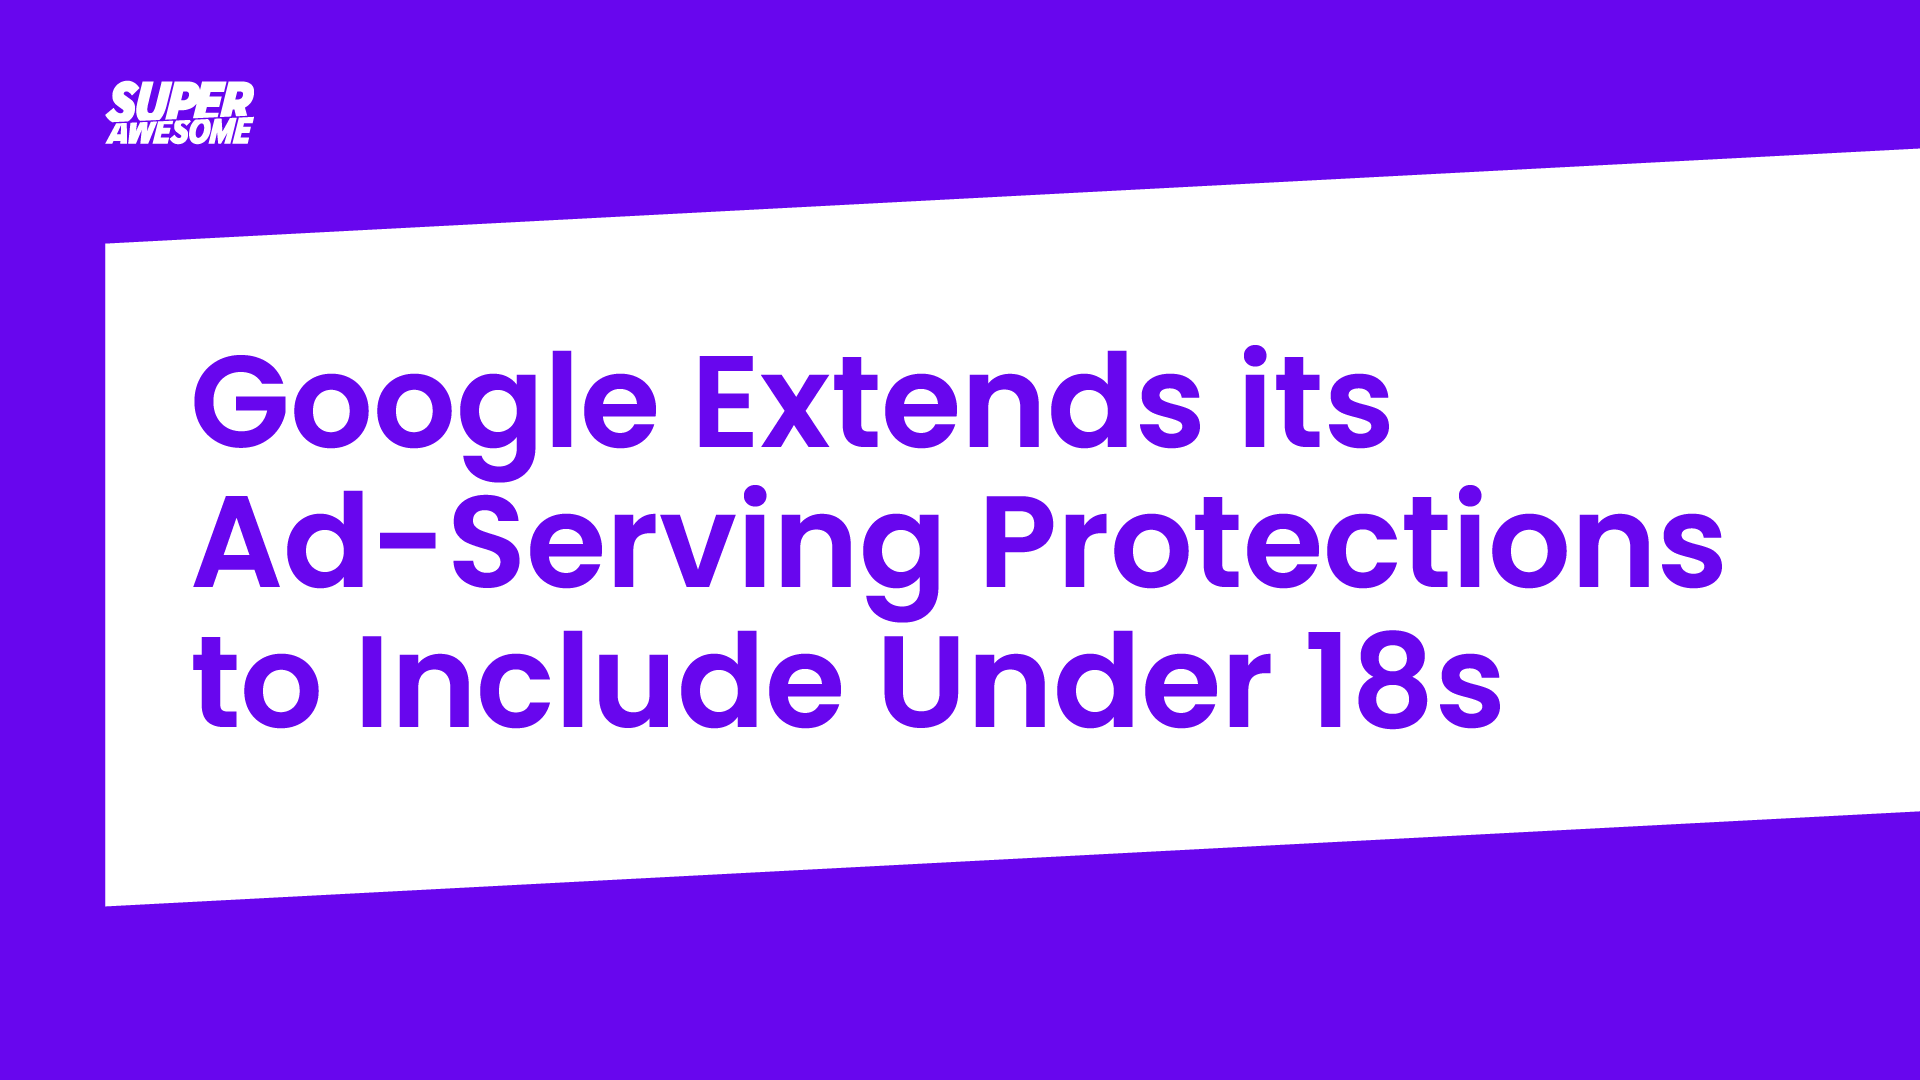 Google Extends its Ad-Serving Protections to Include Under 18s